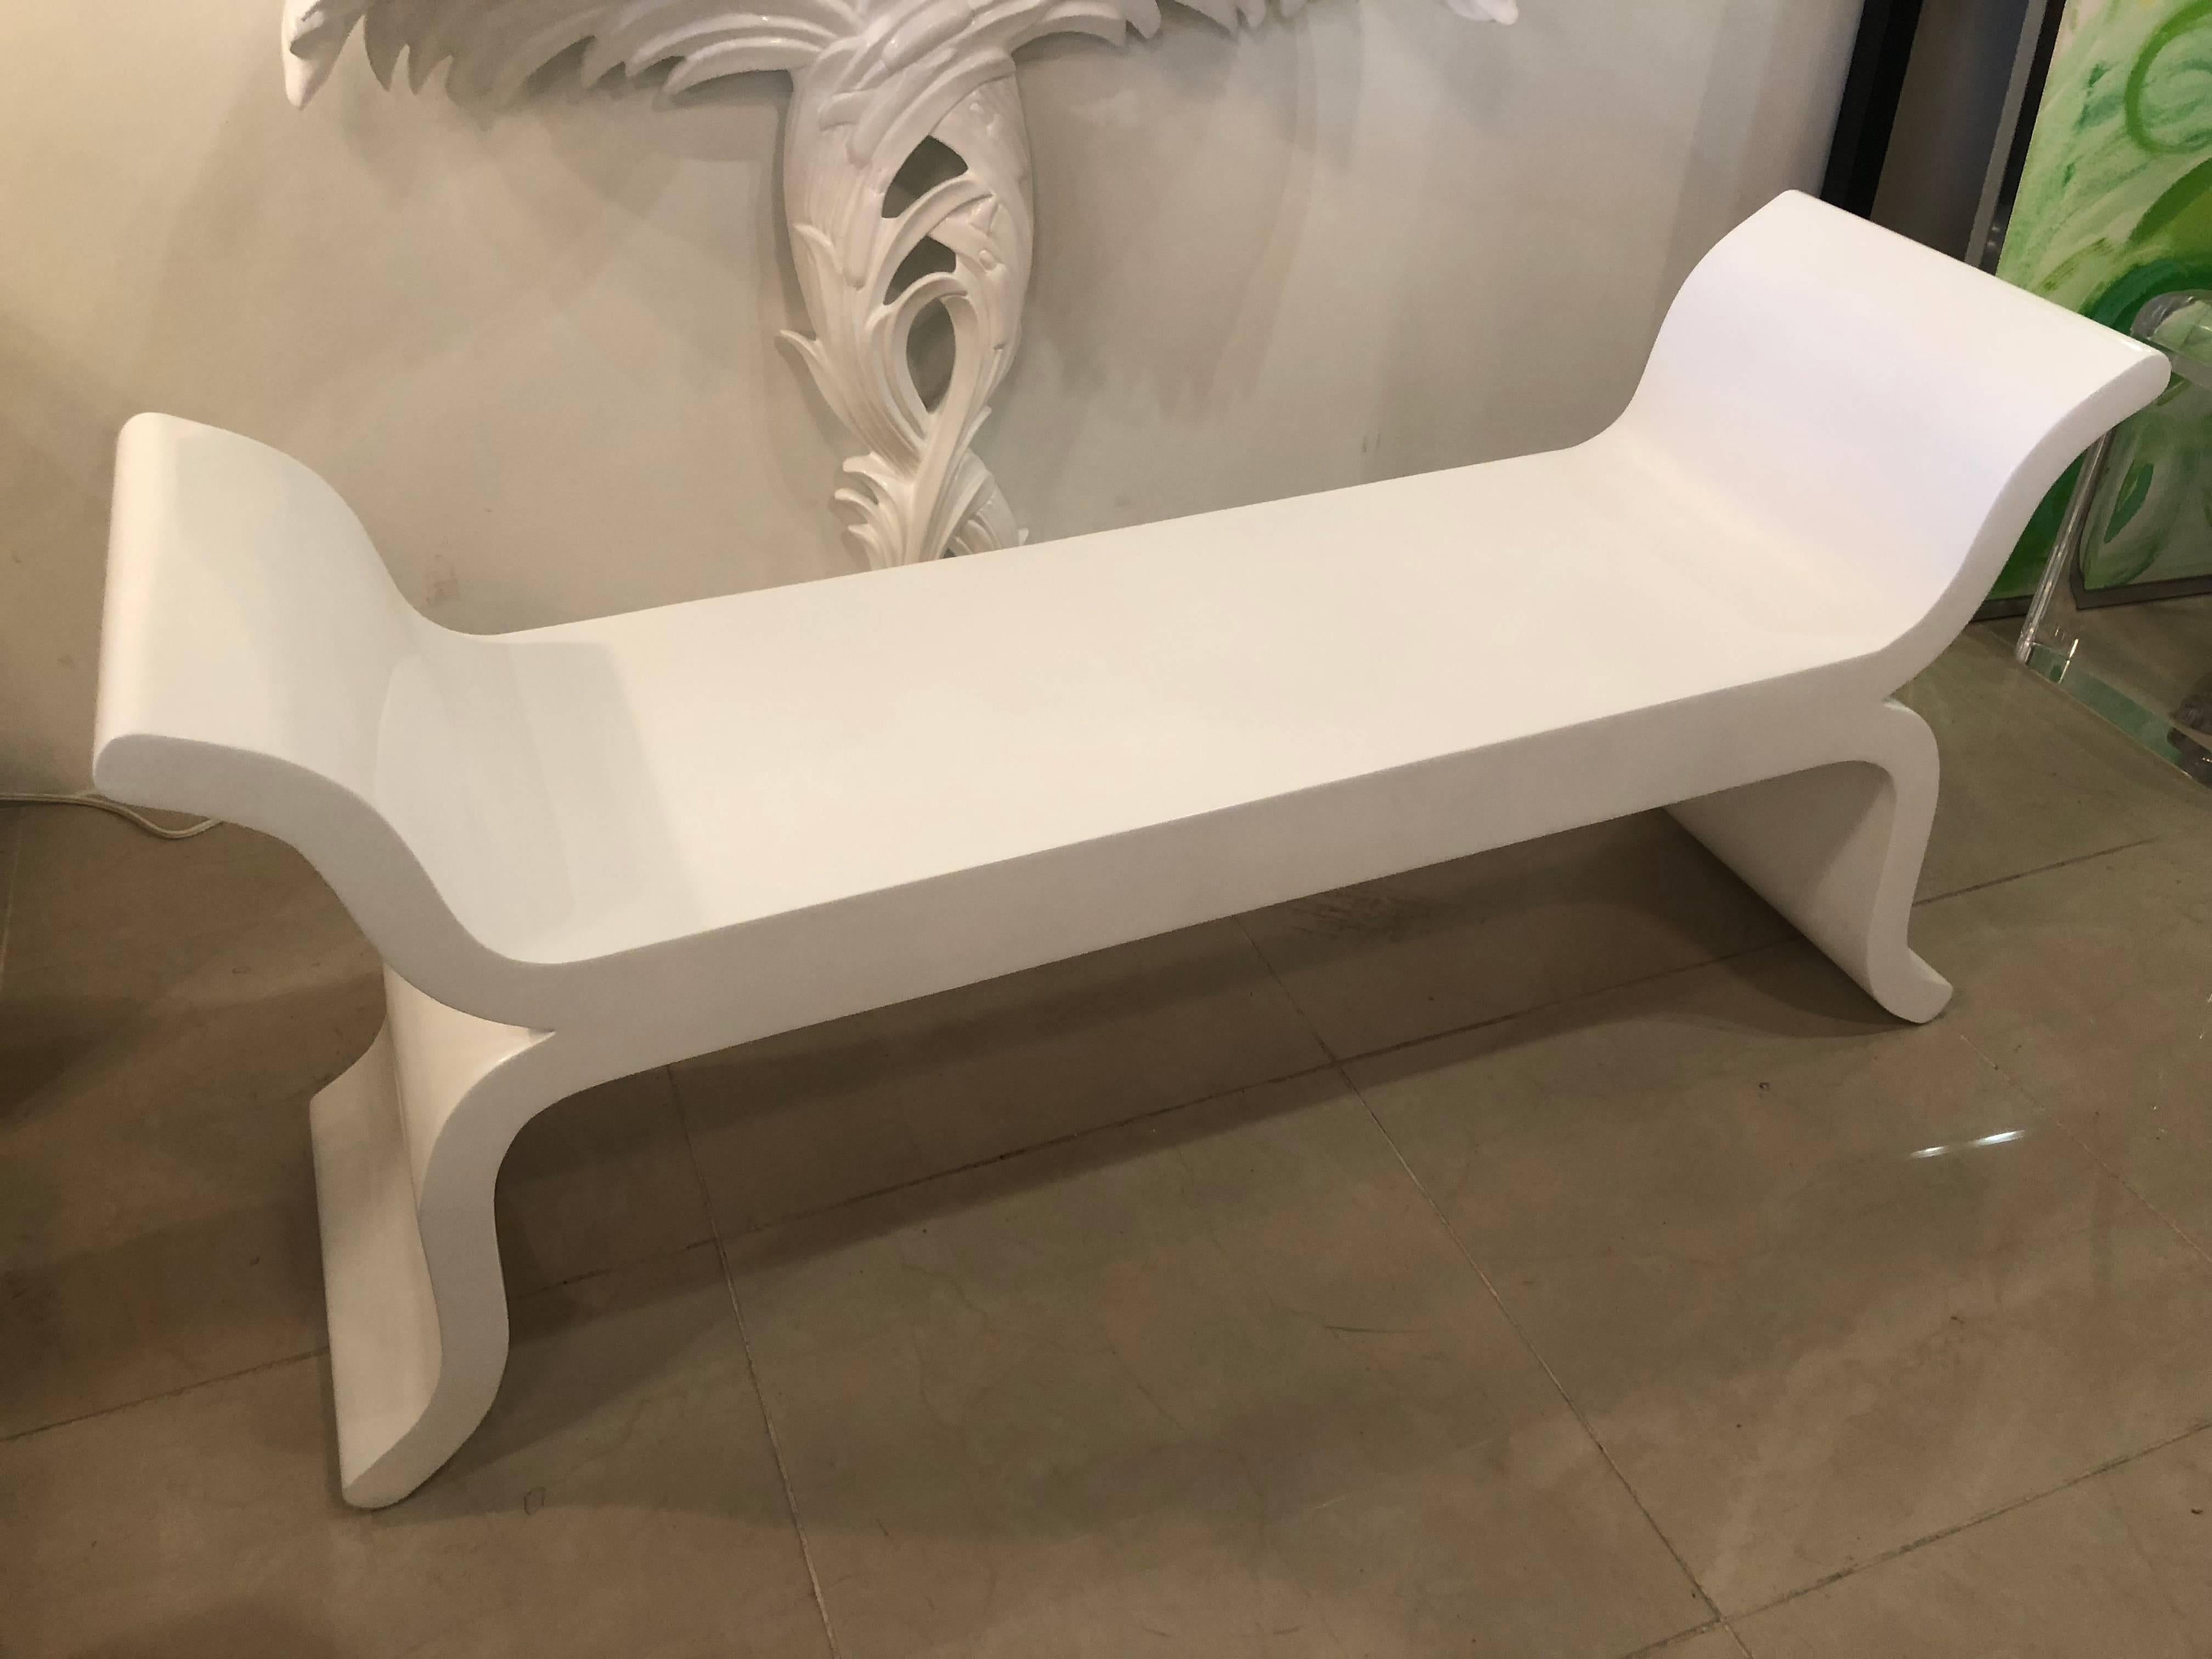 Vintage Ming, scroll Hollywood Regency style wood bench that has been newly lacquered in a white gloss finish. May be minor imperfections to the newly lacquered vintage piece.